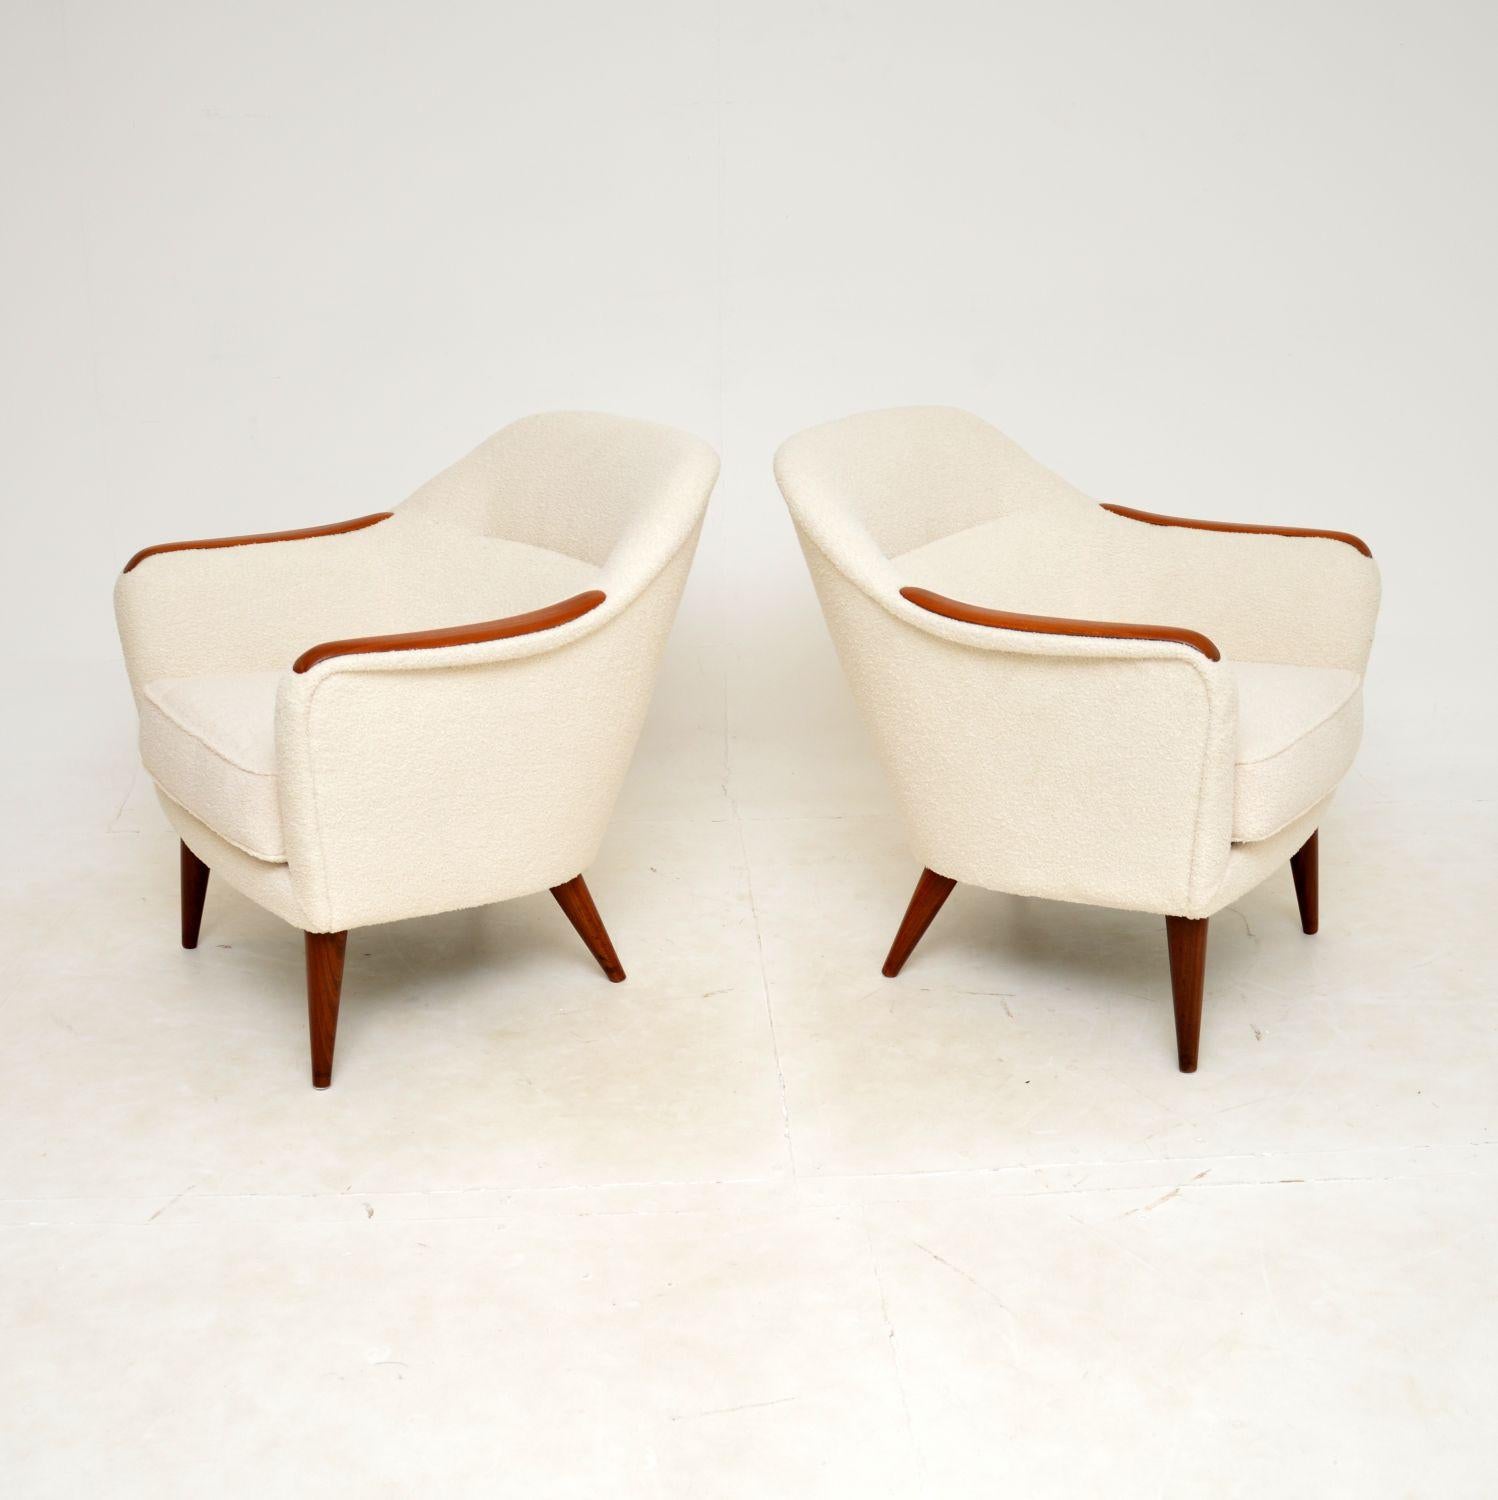 1960s Pair of Swedish Teak Armchairs In Good Condition For Sale In London, GB